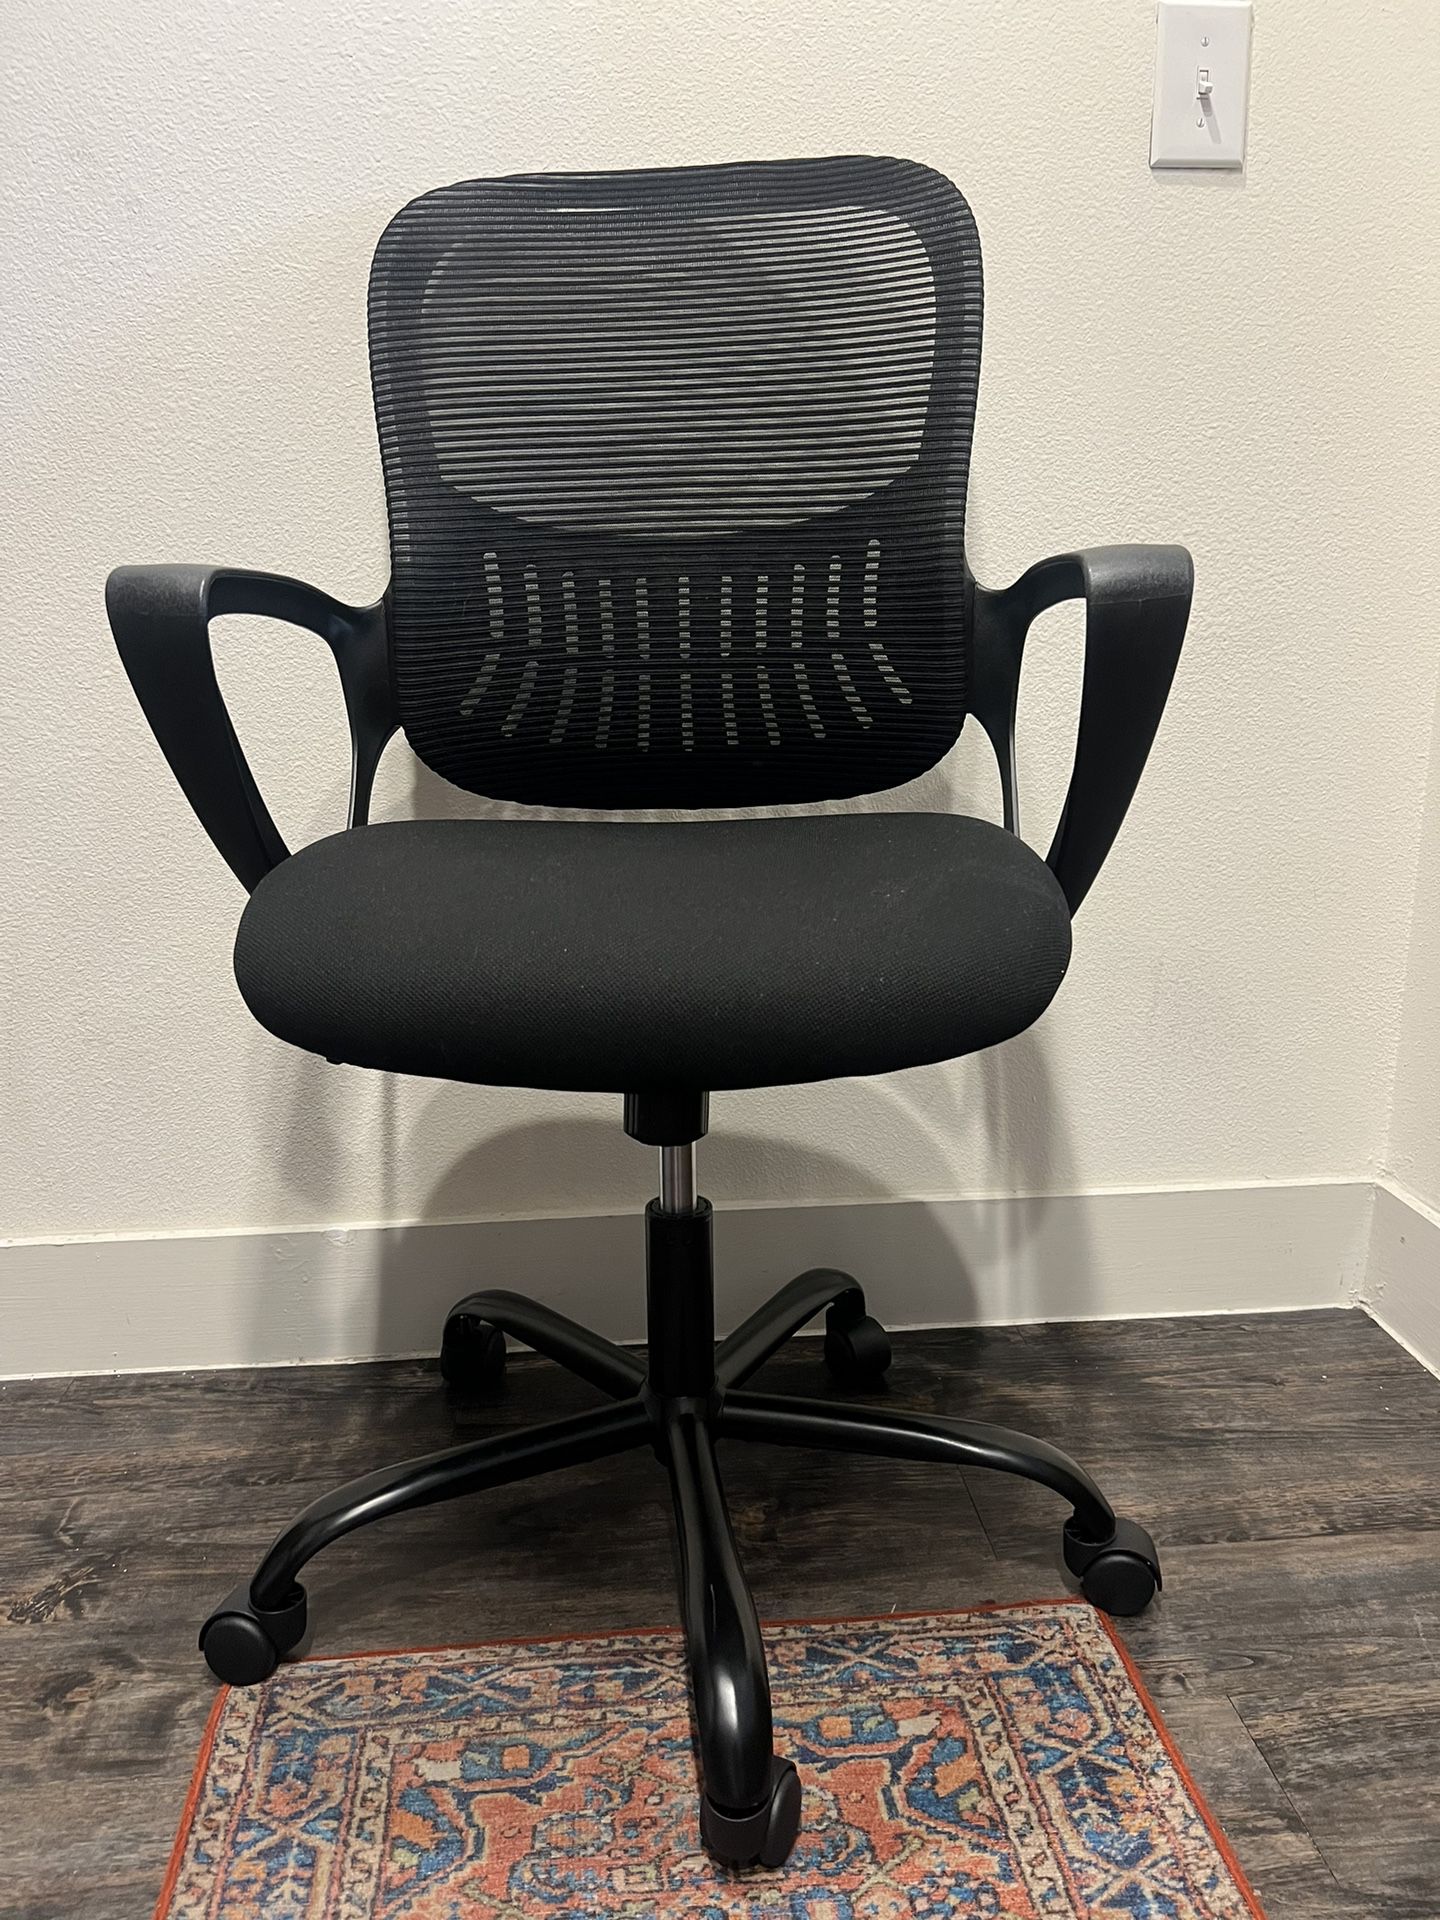 Adjustable Office/ Gaming Chair 